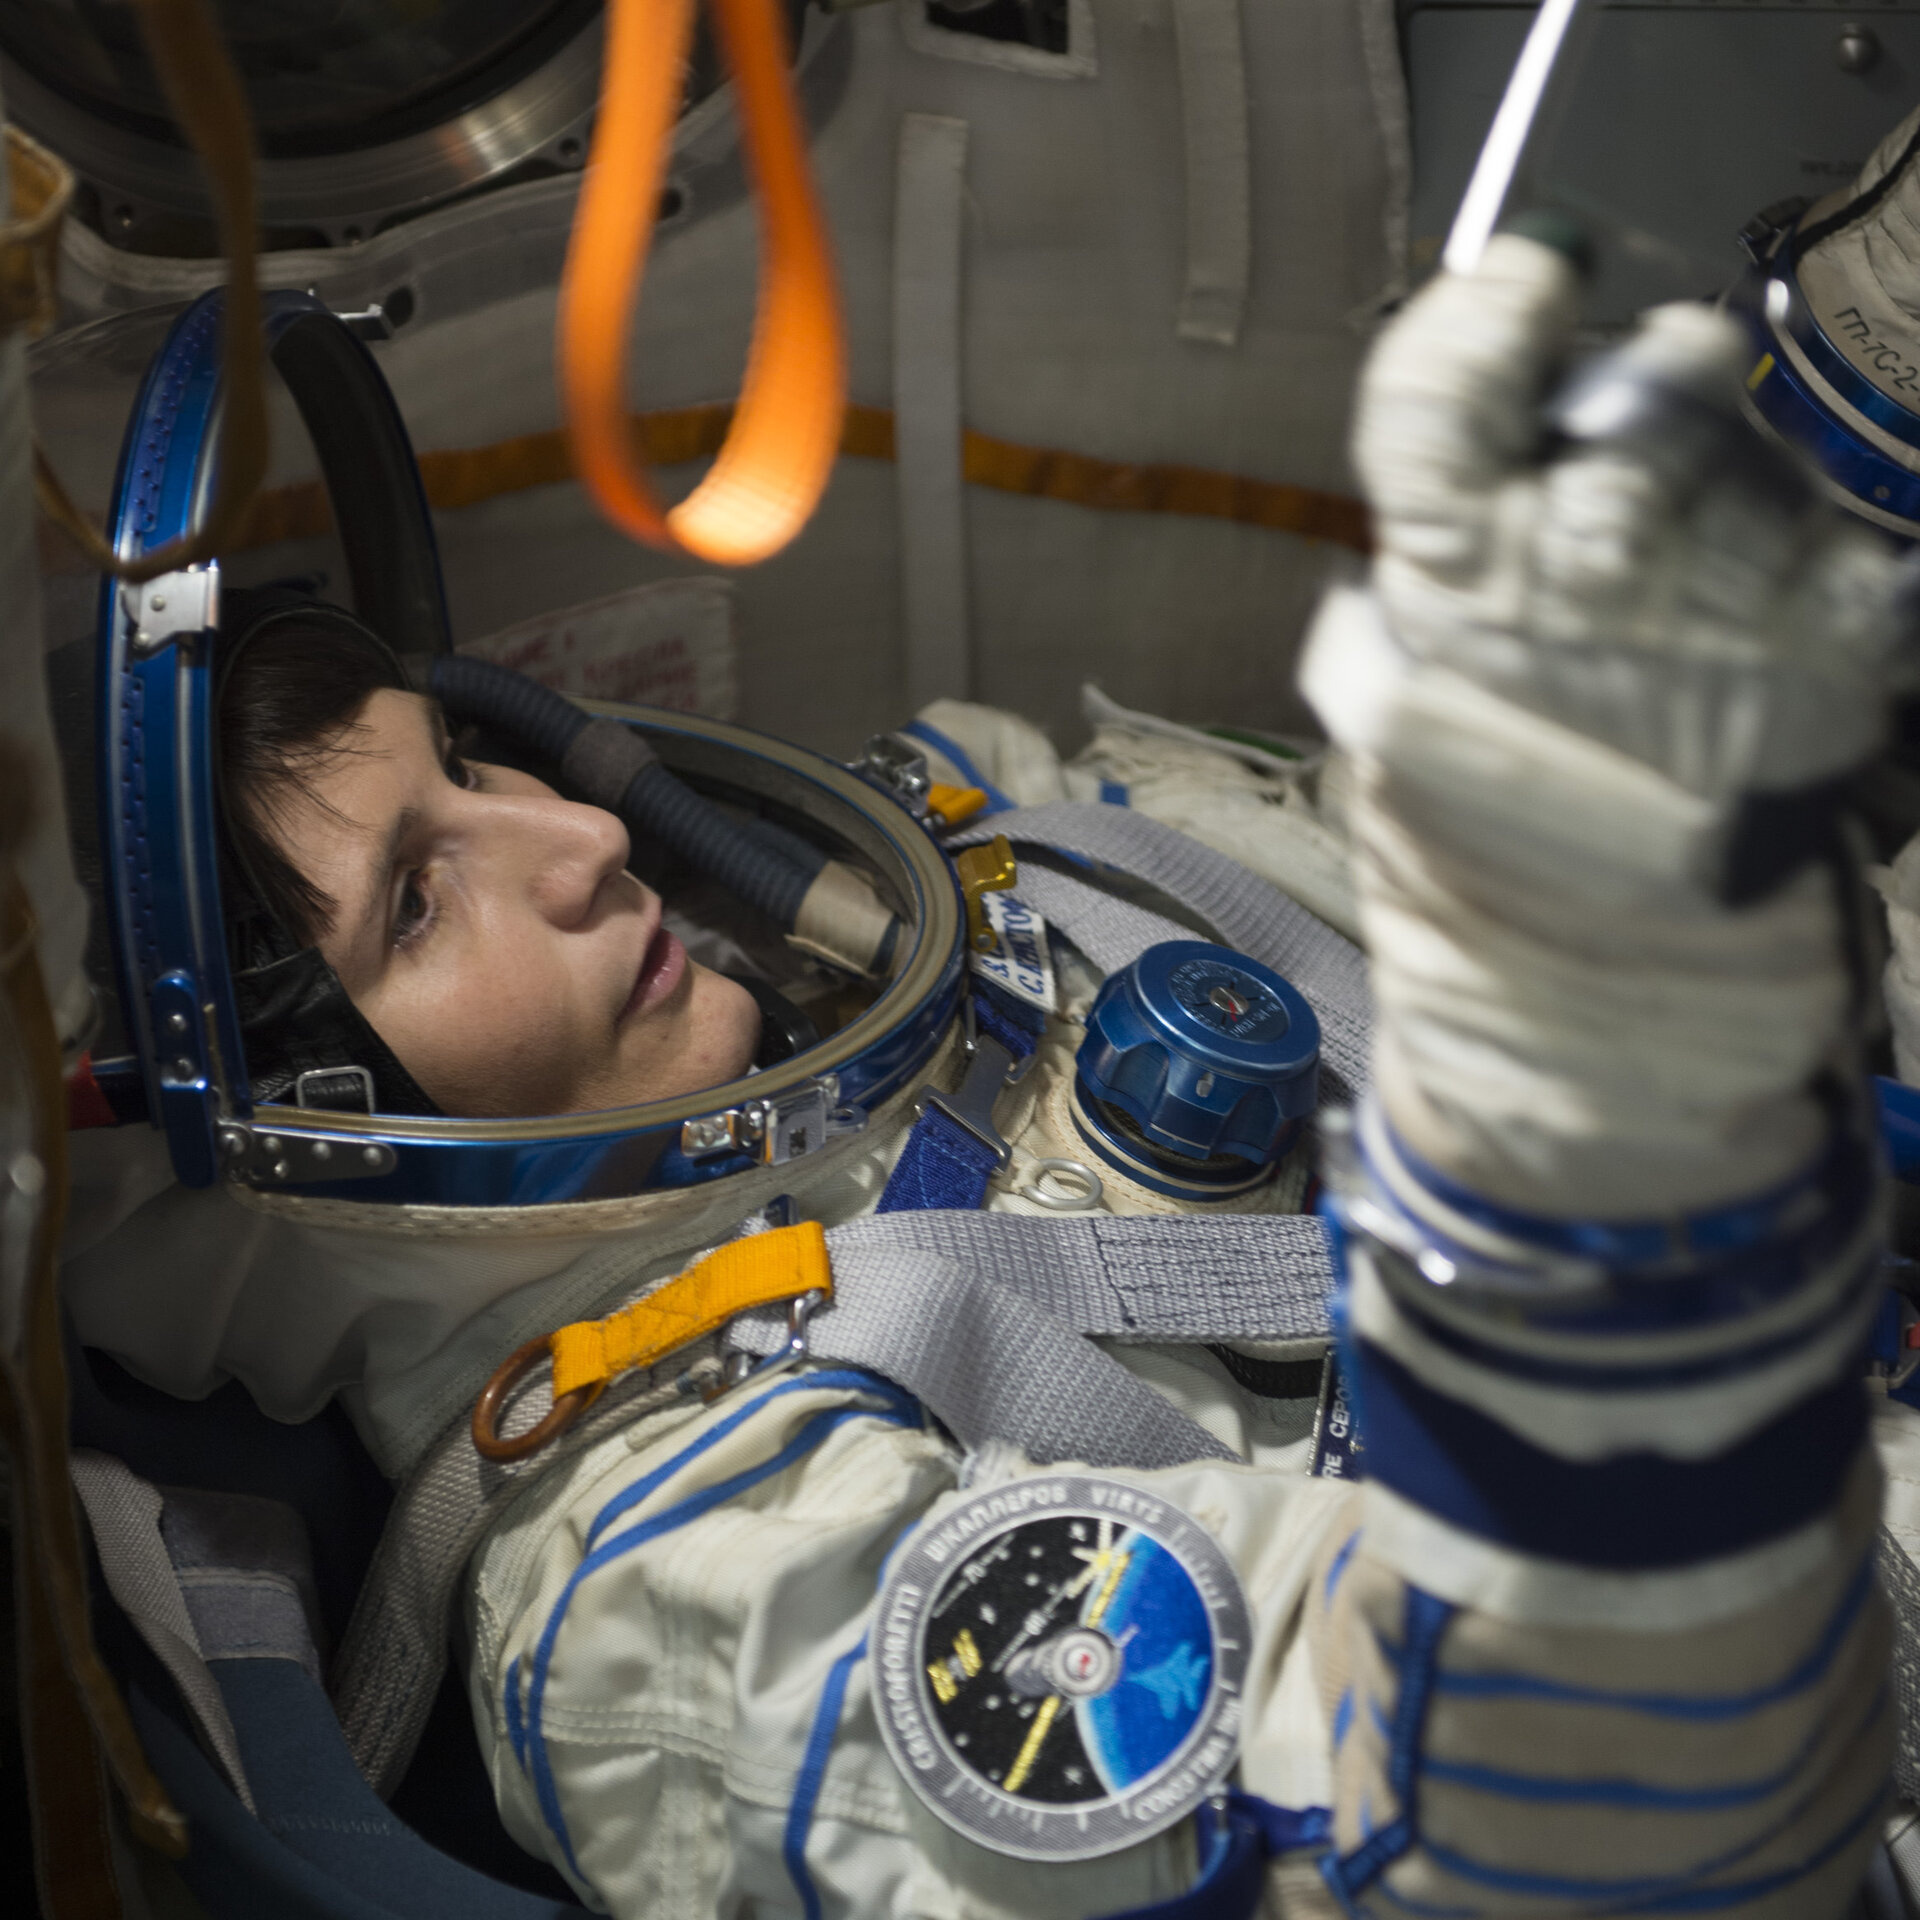 Samantha during training in the full-scale mockup of the Soyuz capsule